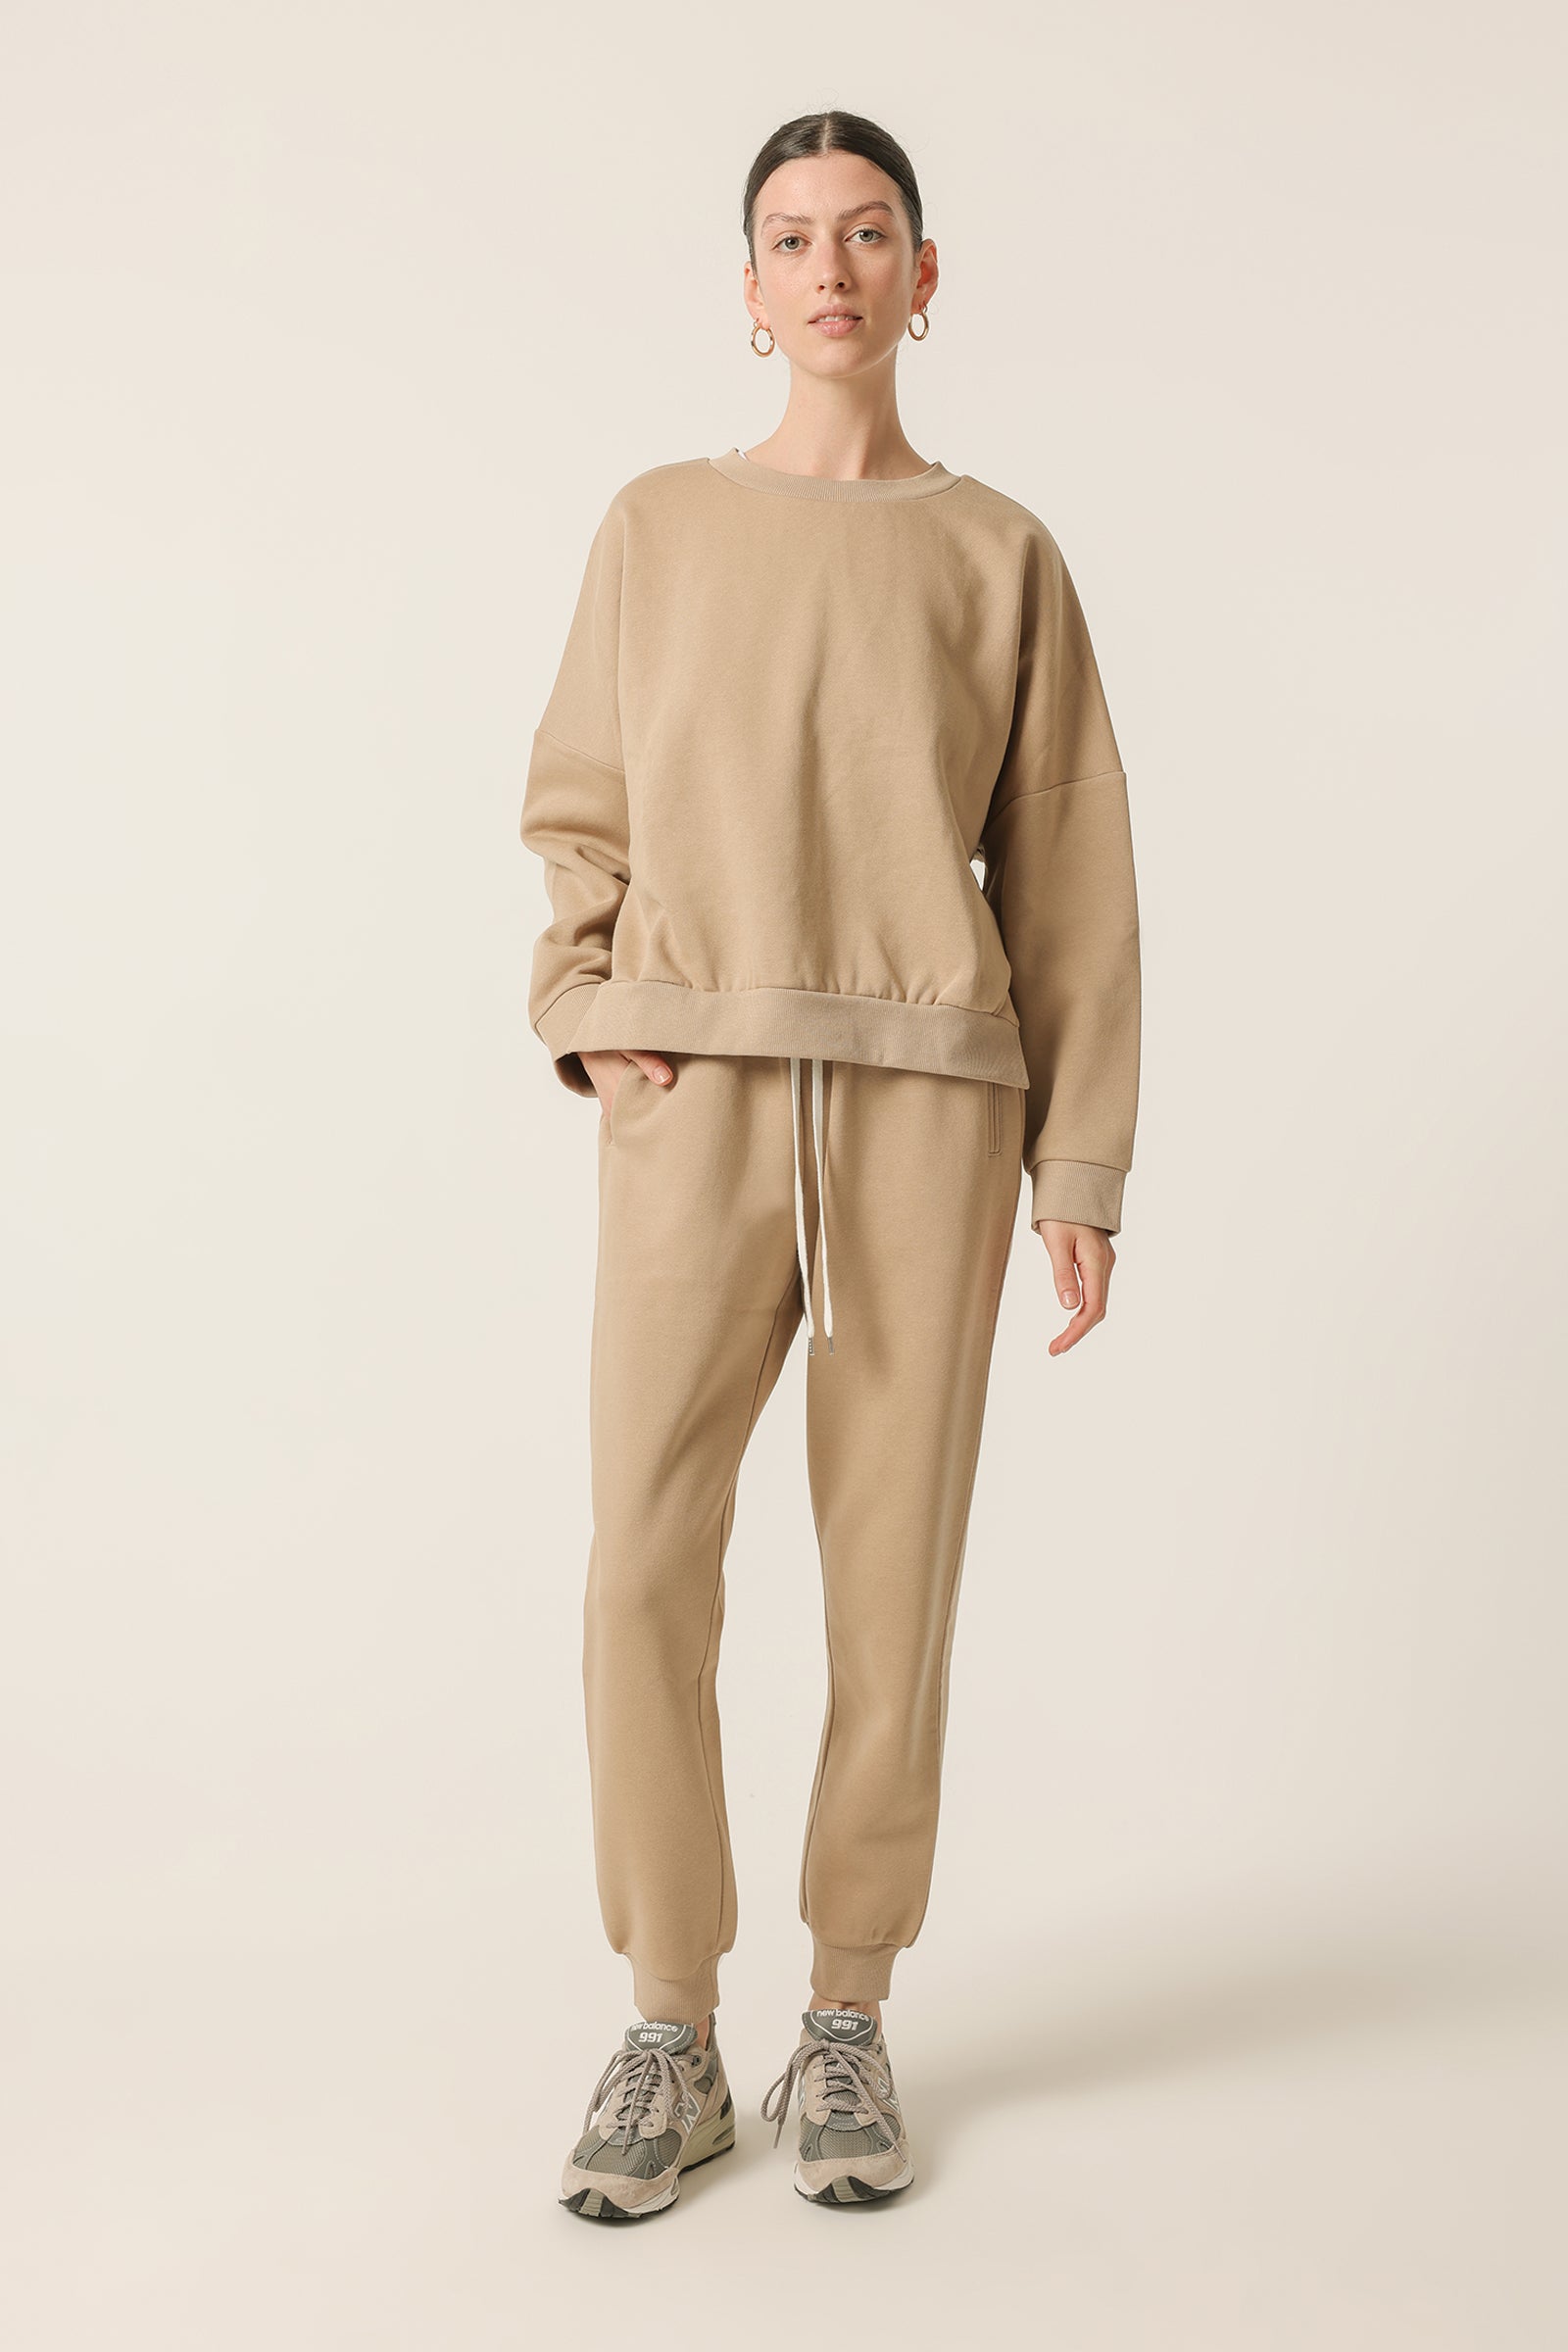 Nude Lucy Carter Classic Trackpant In a Beige Sepia Colour